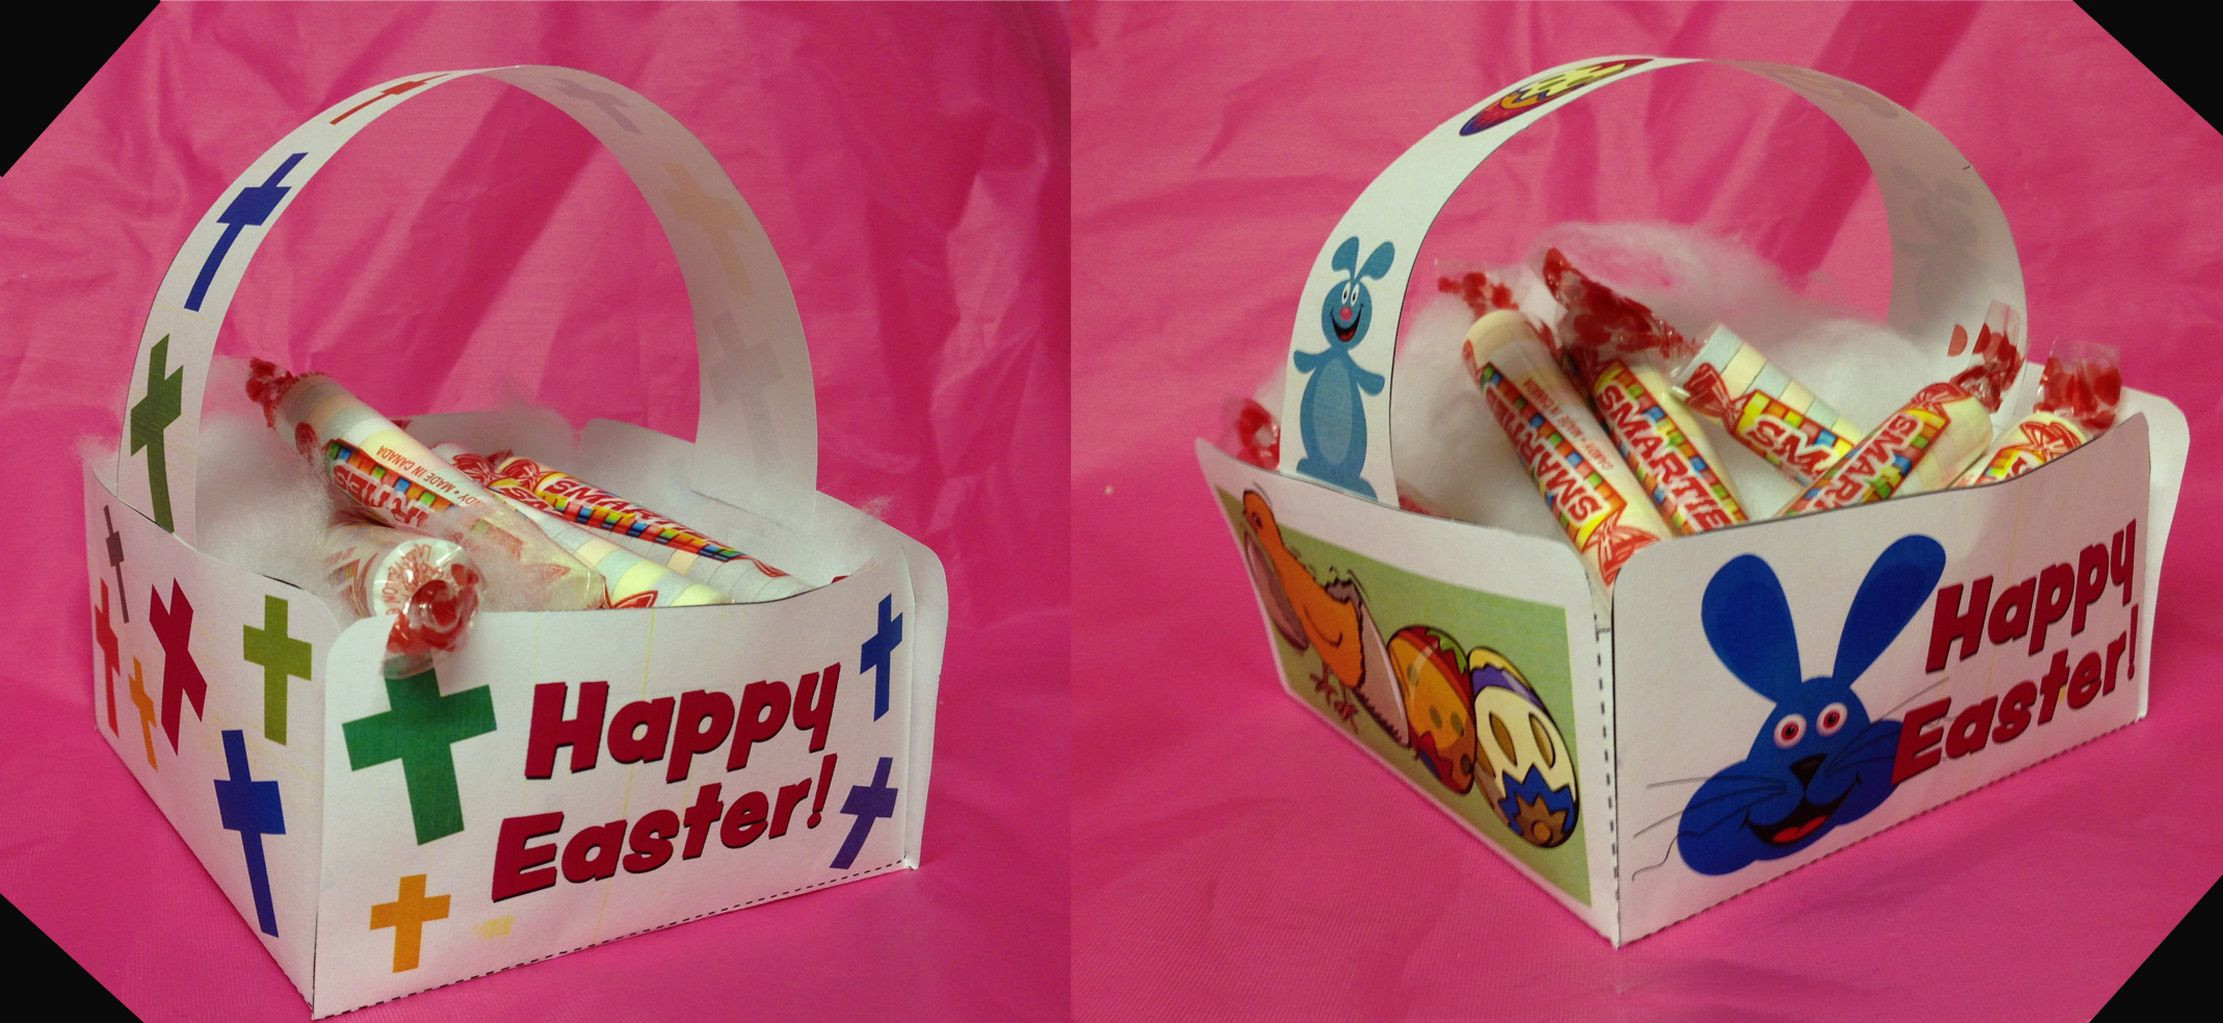 Easter Basket Arts And Crafts
 Free Printable Easter Baskets from Guildcraft Arts